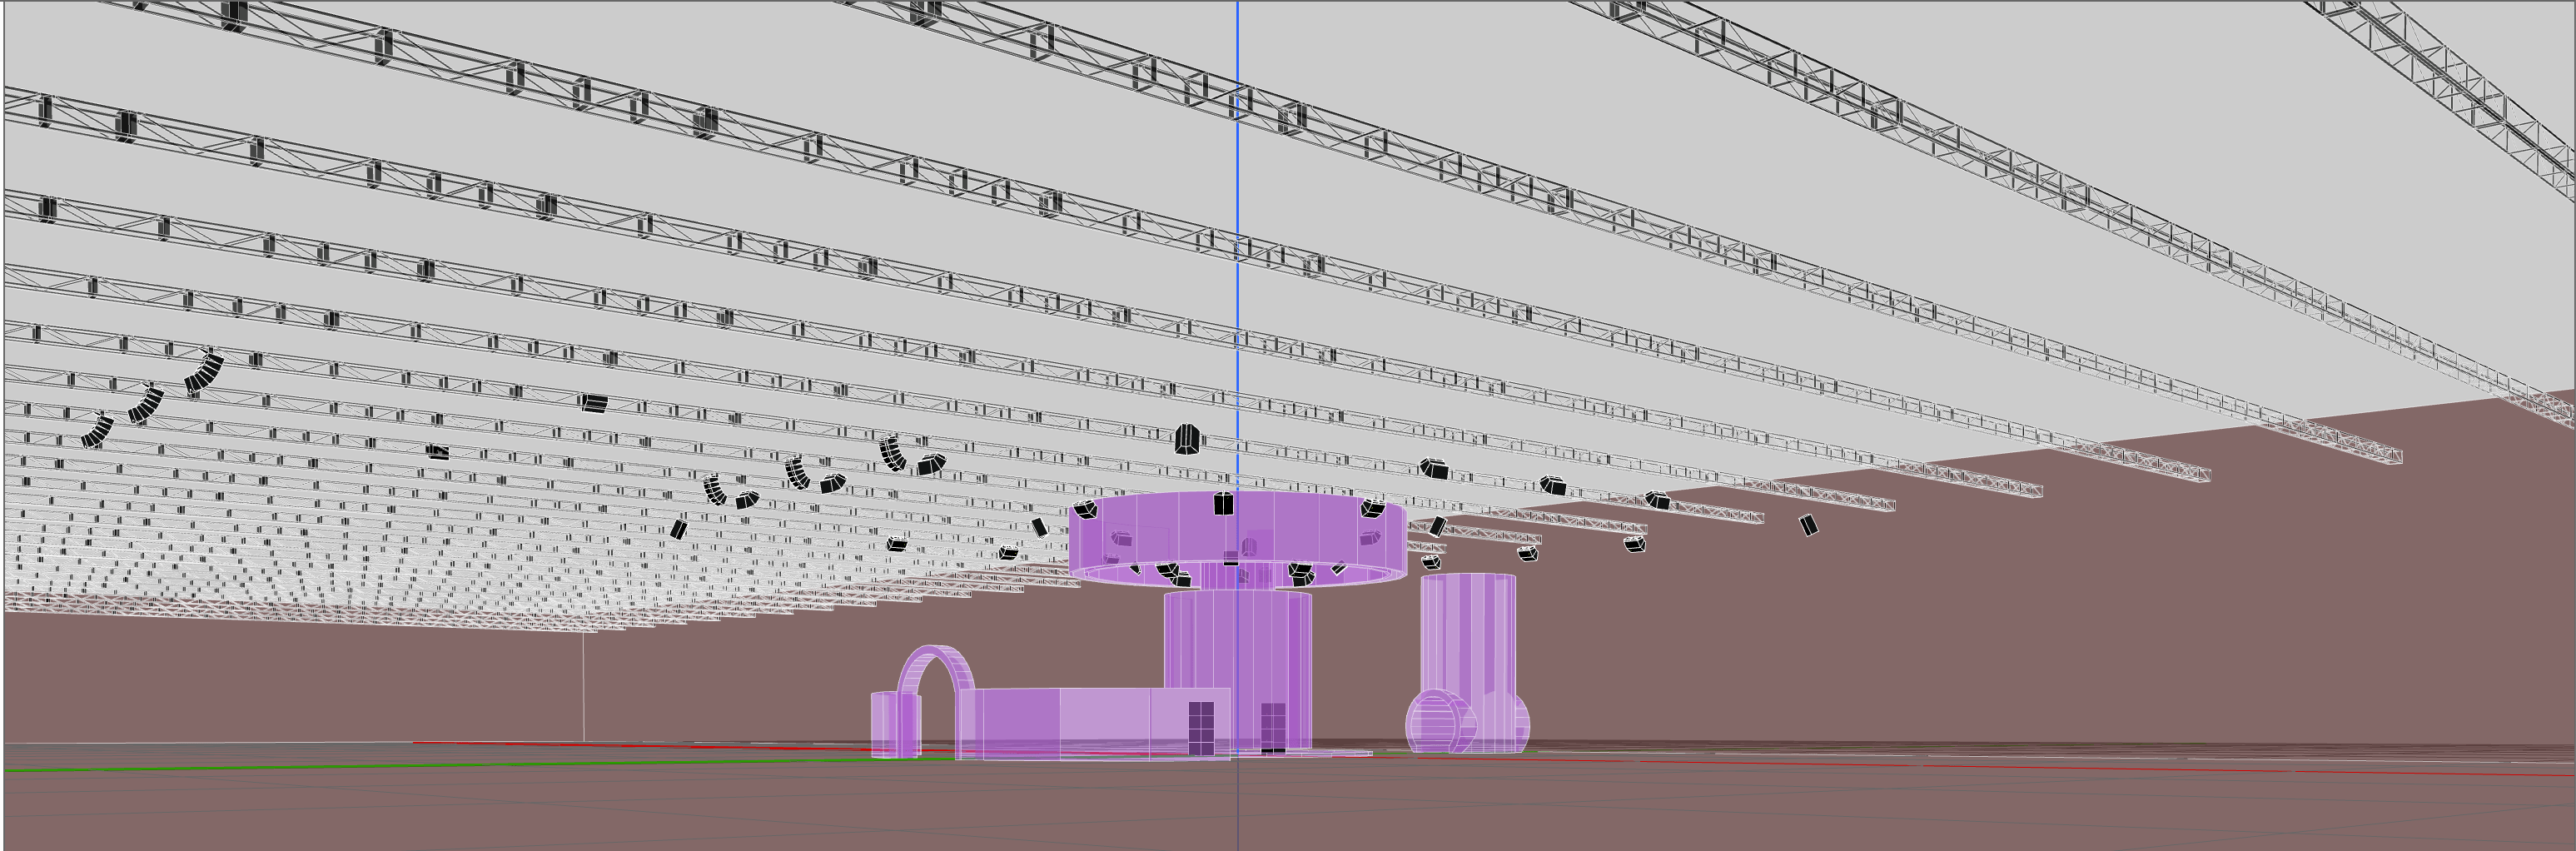 3D Model of sound system set up by L-Acoustics at the Dreamforce Event, San Francisco